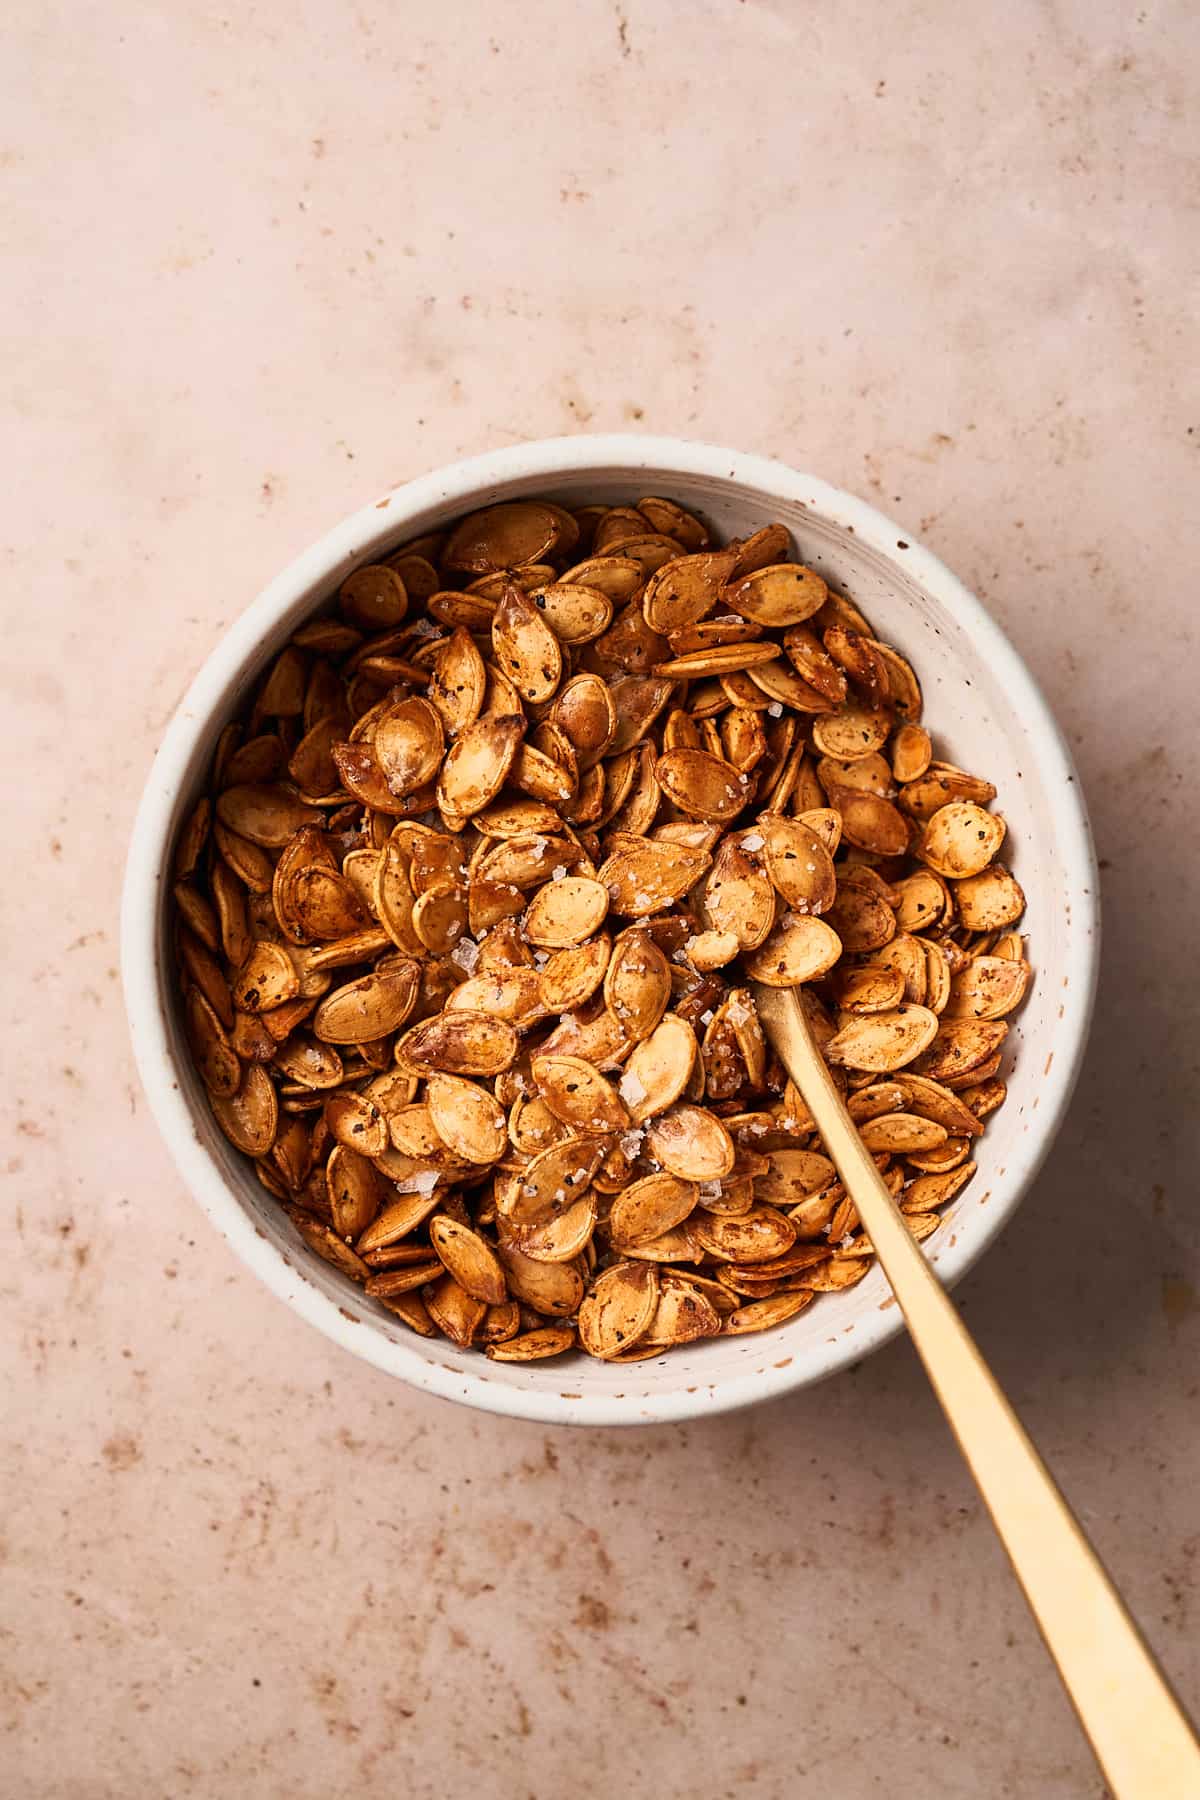 Fully roasted pumpkin seeds in a ceramic bowl.